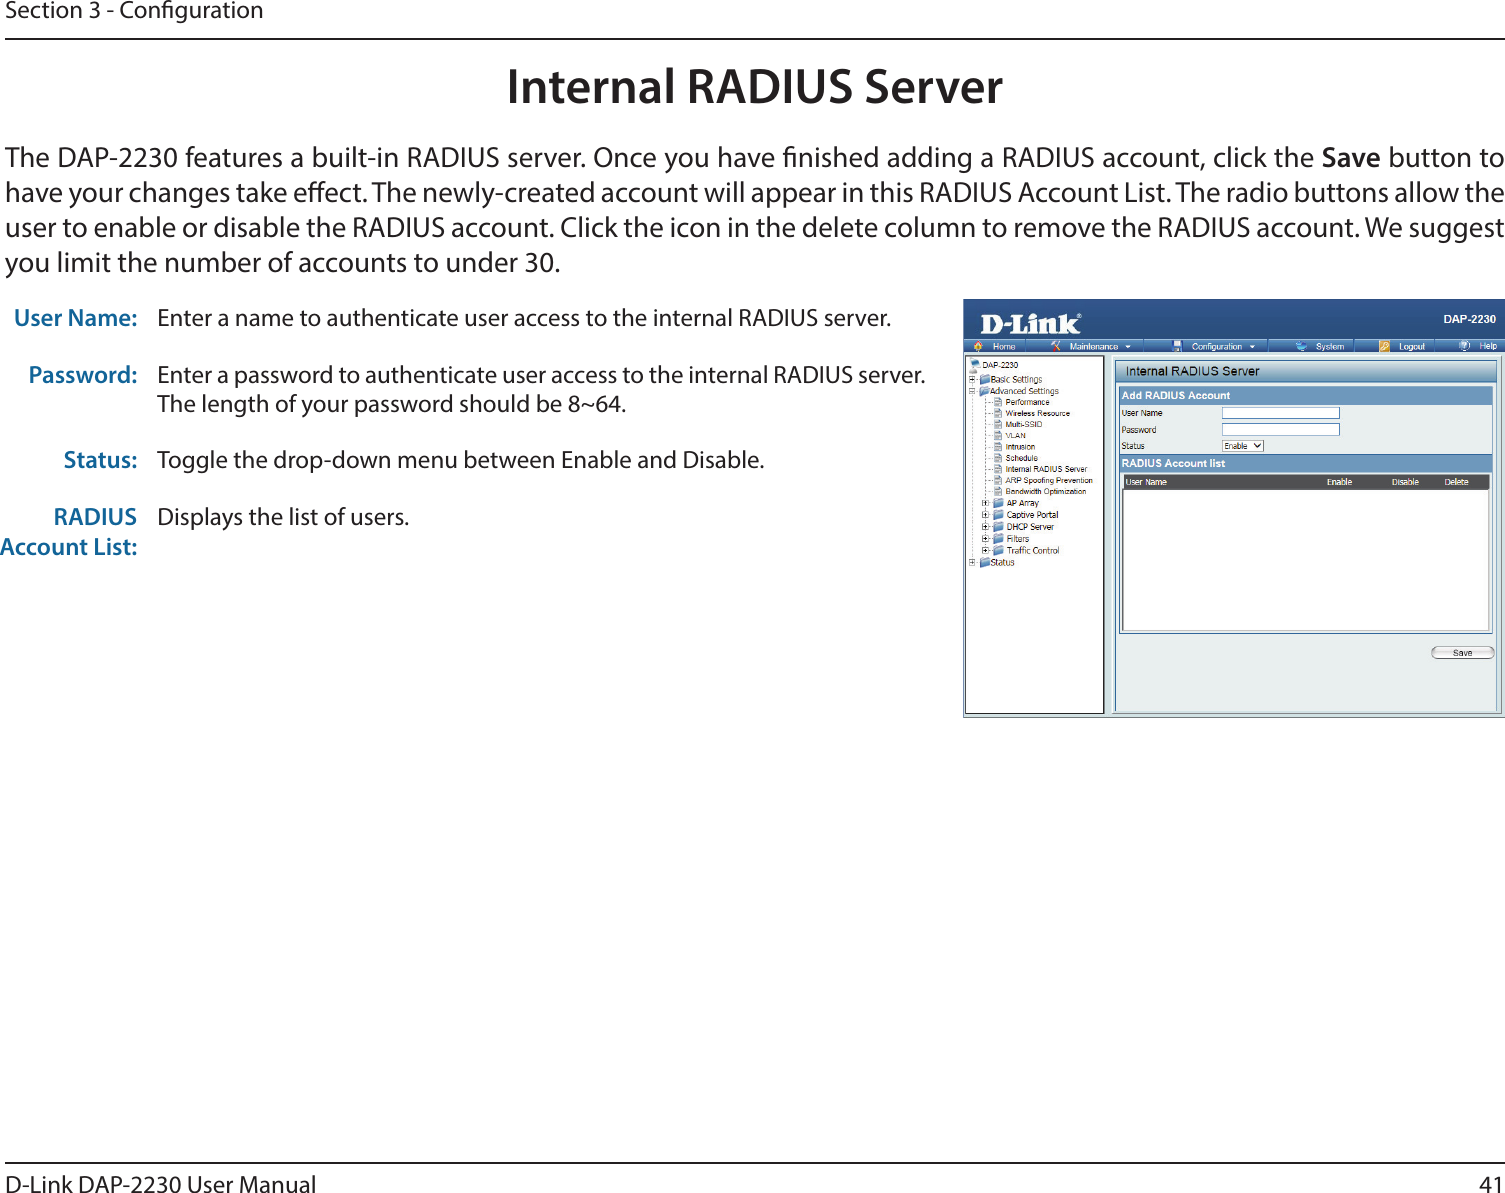 41D-Link DAP-2230 User ManualSection 3 - CongurationInternal RADIUS ServerThe DAP-2230 features a built-in RADIUS server. Once you have nished adding a RADIUS account, click the Save button to have your changes take eect. The newly-created account will appear in this RADIUS Account List. The radio buttons allow the user to enable or disable the RADIUS account. Click the icon in the delete column to remove the RADIUS account. We suggest you limit the number of accounts to under 30.User Name: Enter a name to authenticate user access to the internal RADIUS server.Password: Enter a password to authenticate user access to the internal RADIUS server. The length of your password should be 8~64.Status: Toggle the drop-down menu between Enable and Disable.RADIUS Account List:Displays the list of users. 